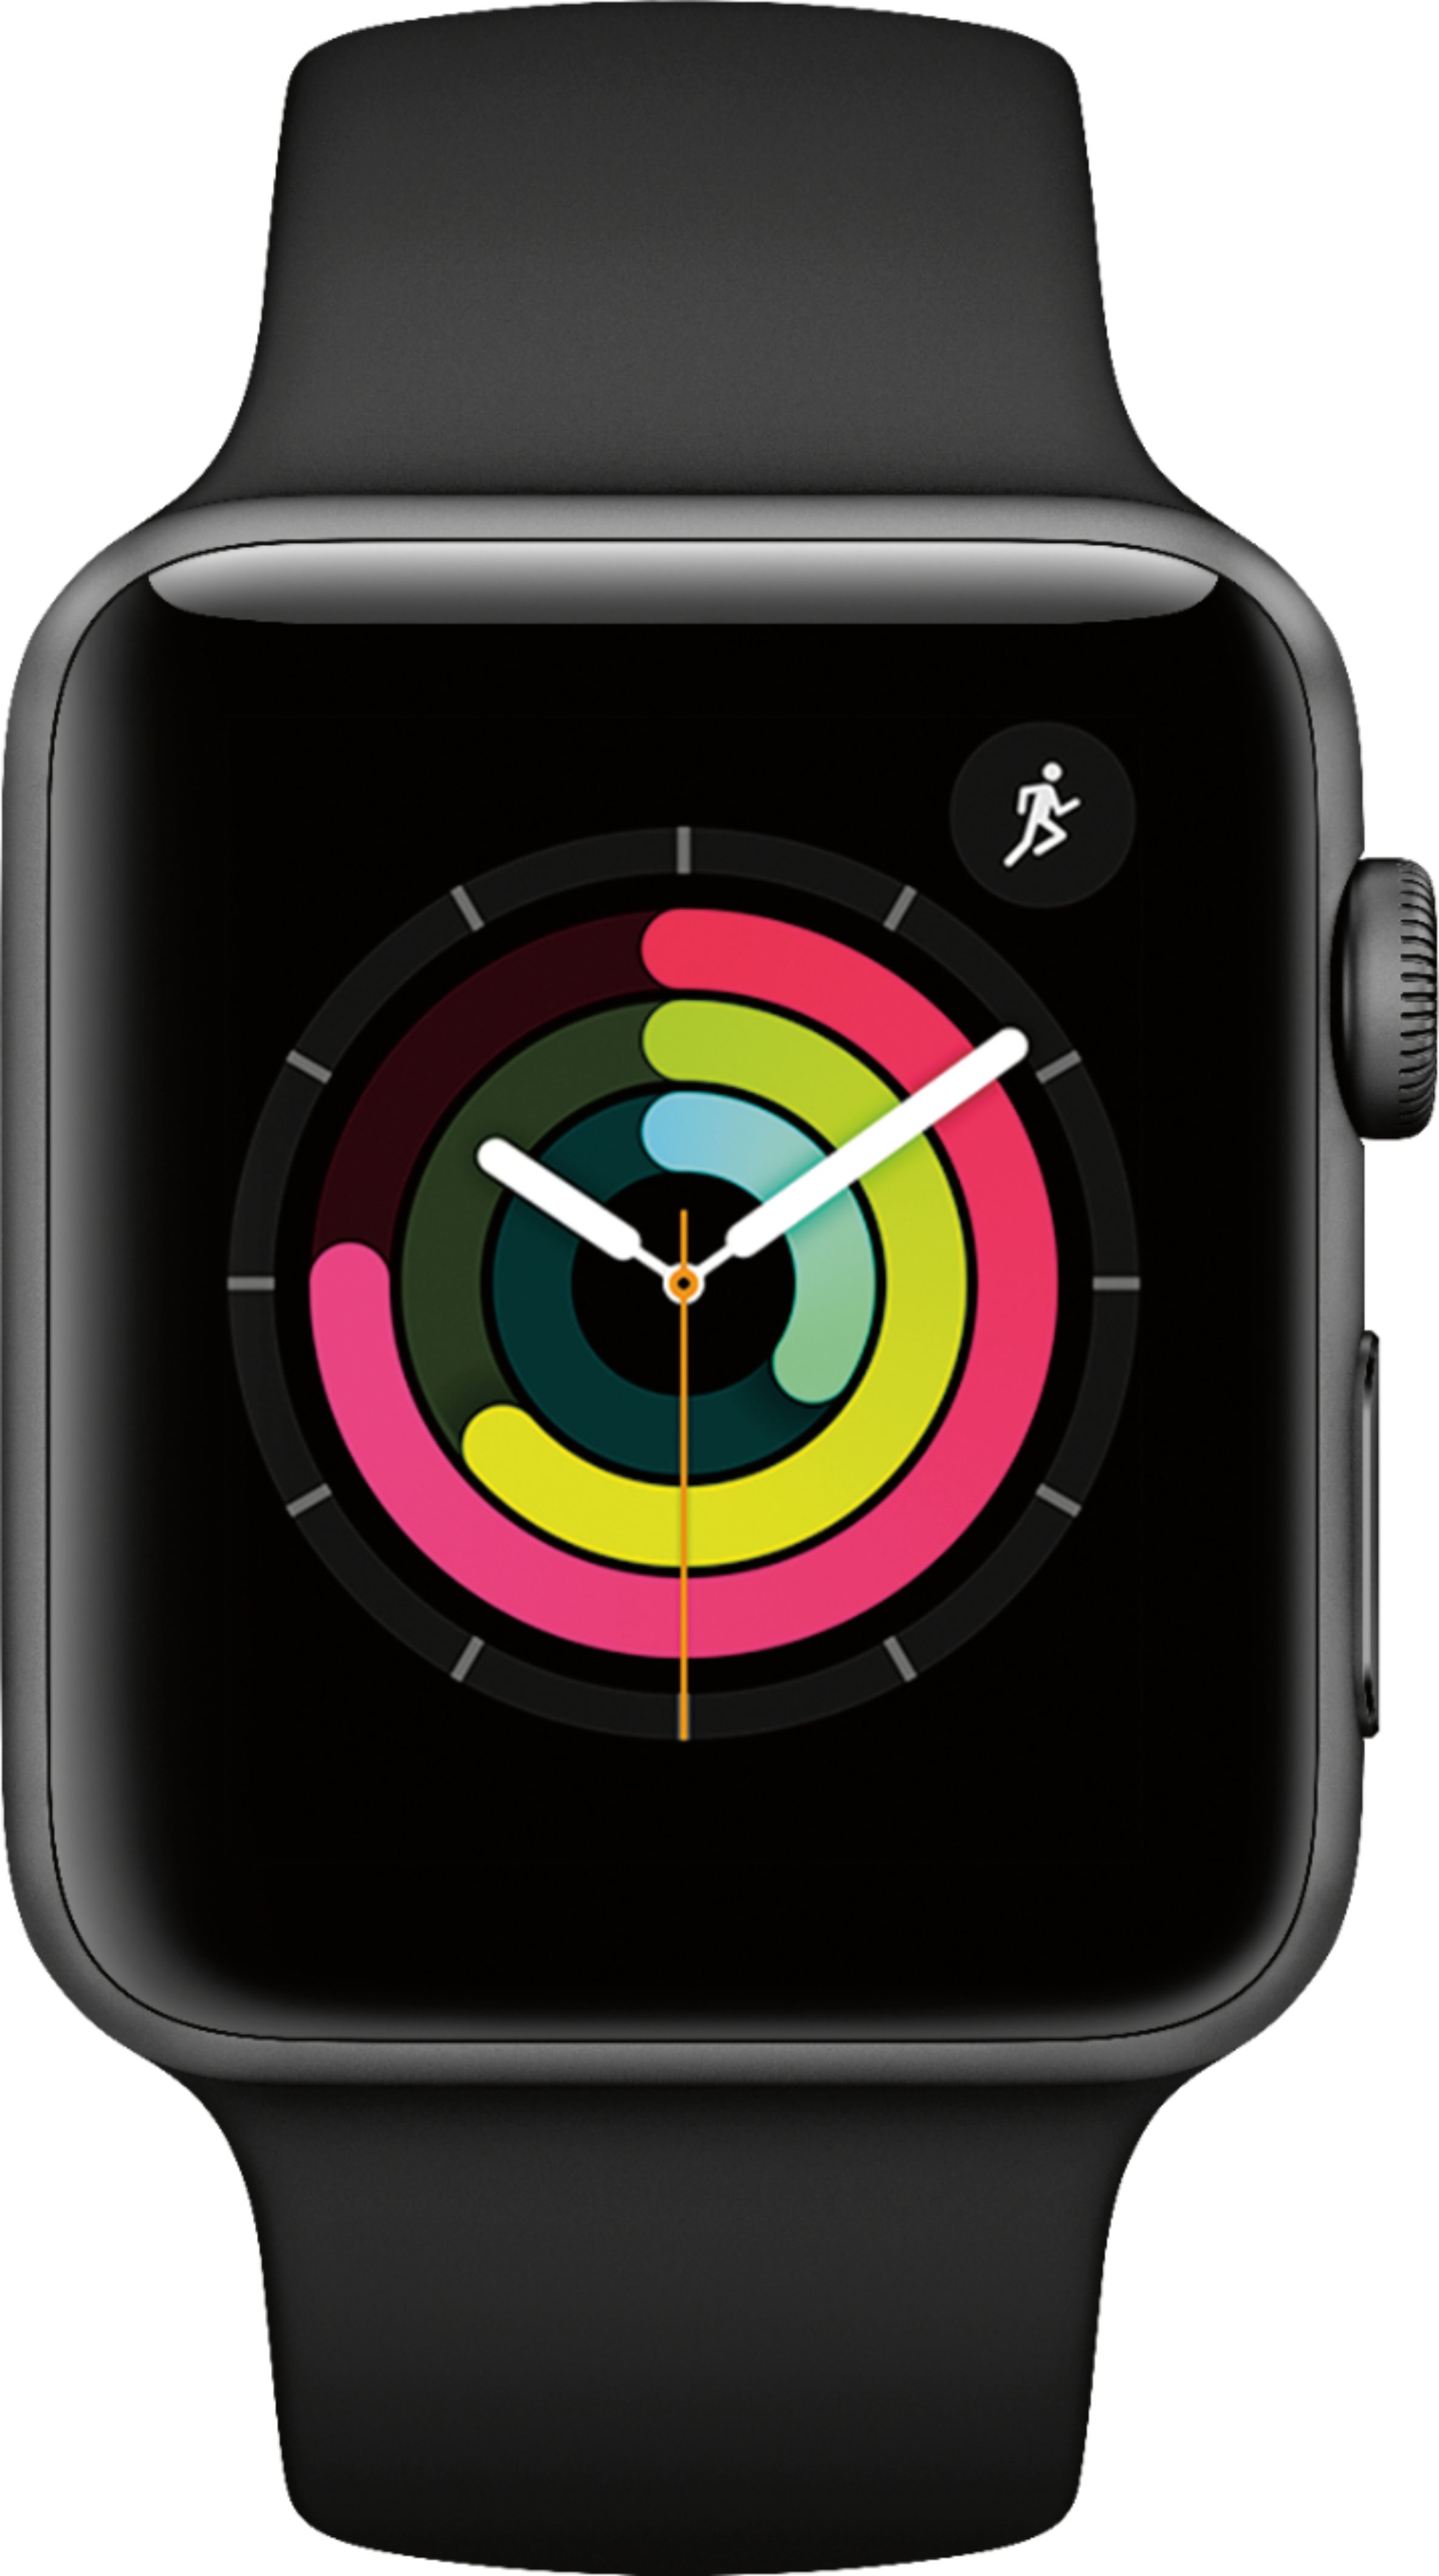 Apple Watch Series 3 (GPS) 42mm Space Gray Aluminum Case with Black Sport  Band - Space Gray Aluminum